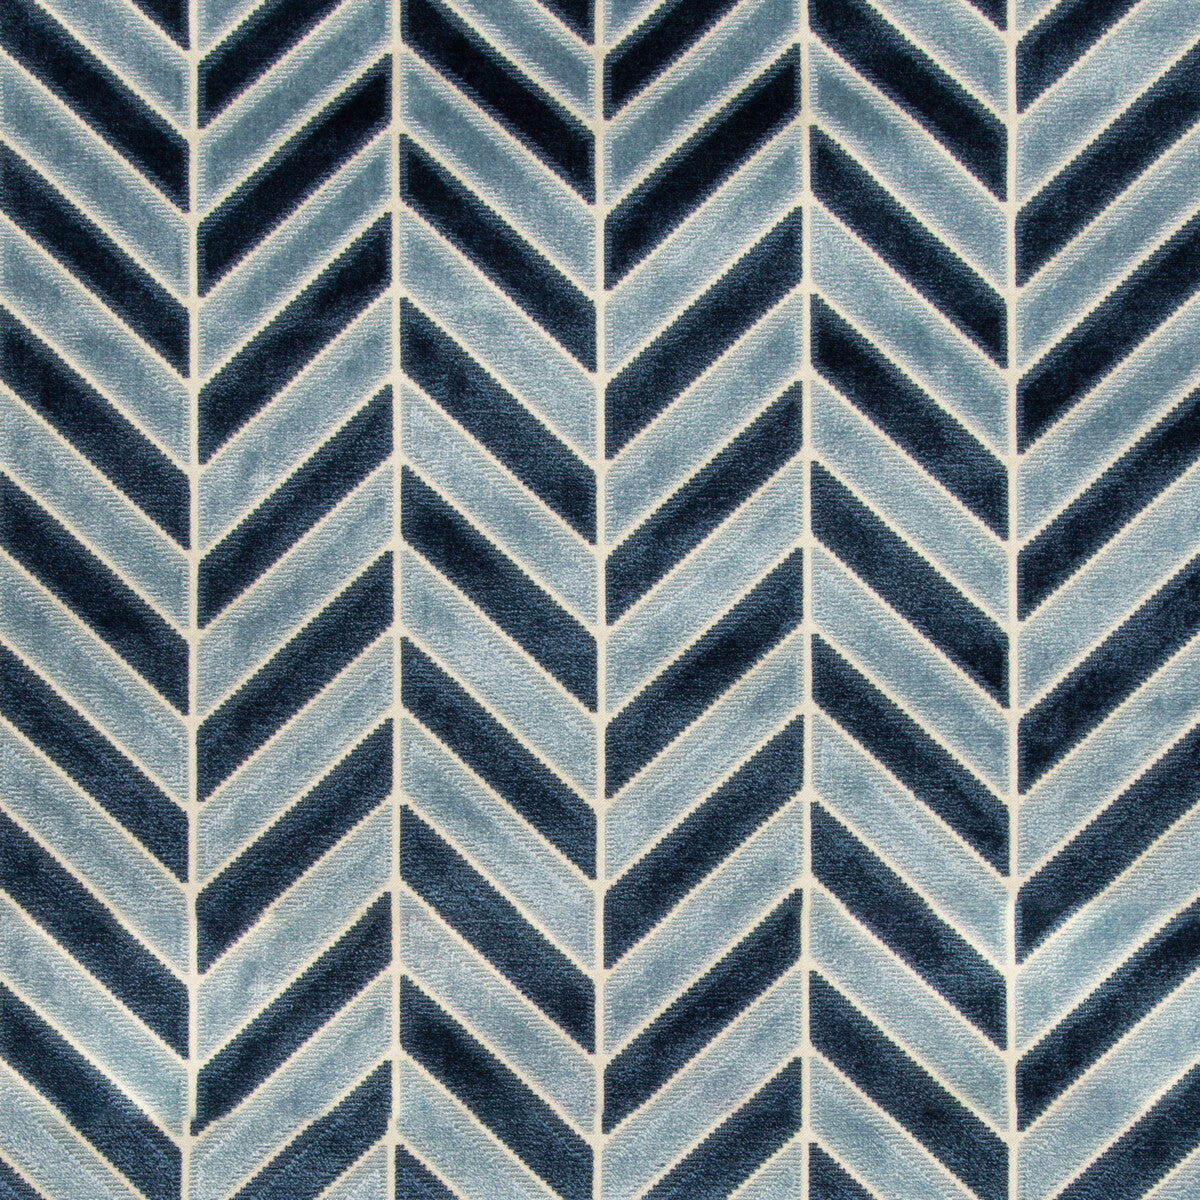 Pinnacle Velvet fabric in navy color - pattern 34779.5.0 - by Kravet Couture in the Artisan Velvets collection